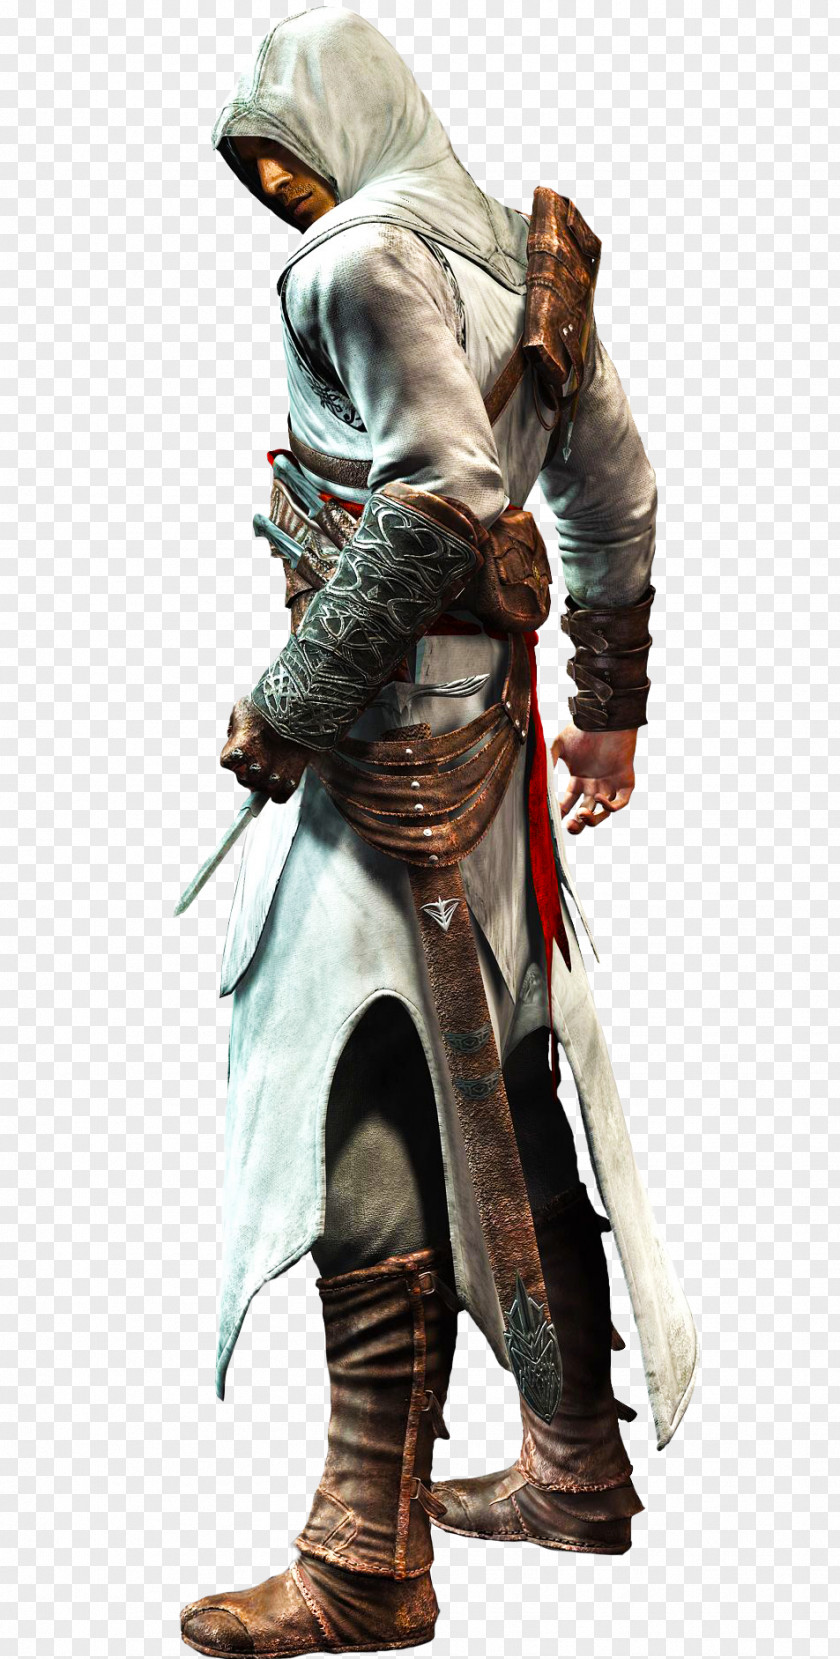 Altair Assassins Creed Transparent Image III Creed: Bloodlines Revelations PNG